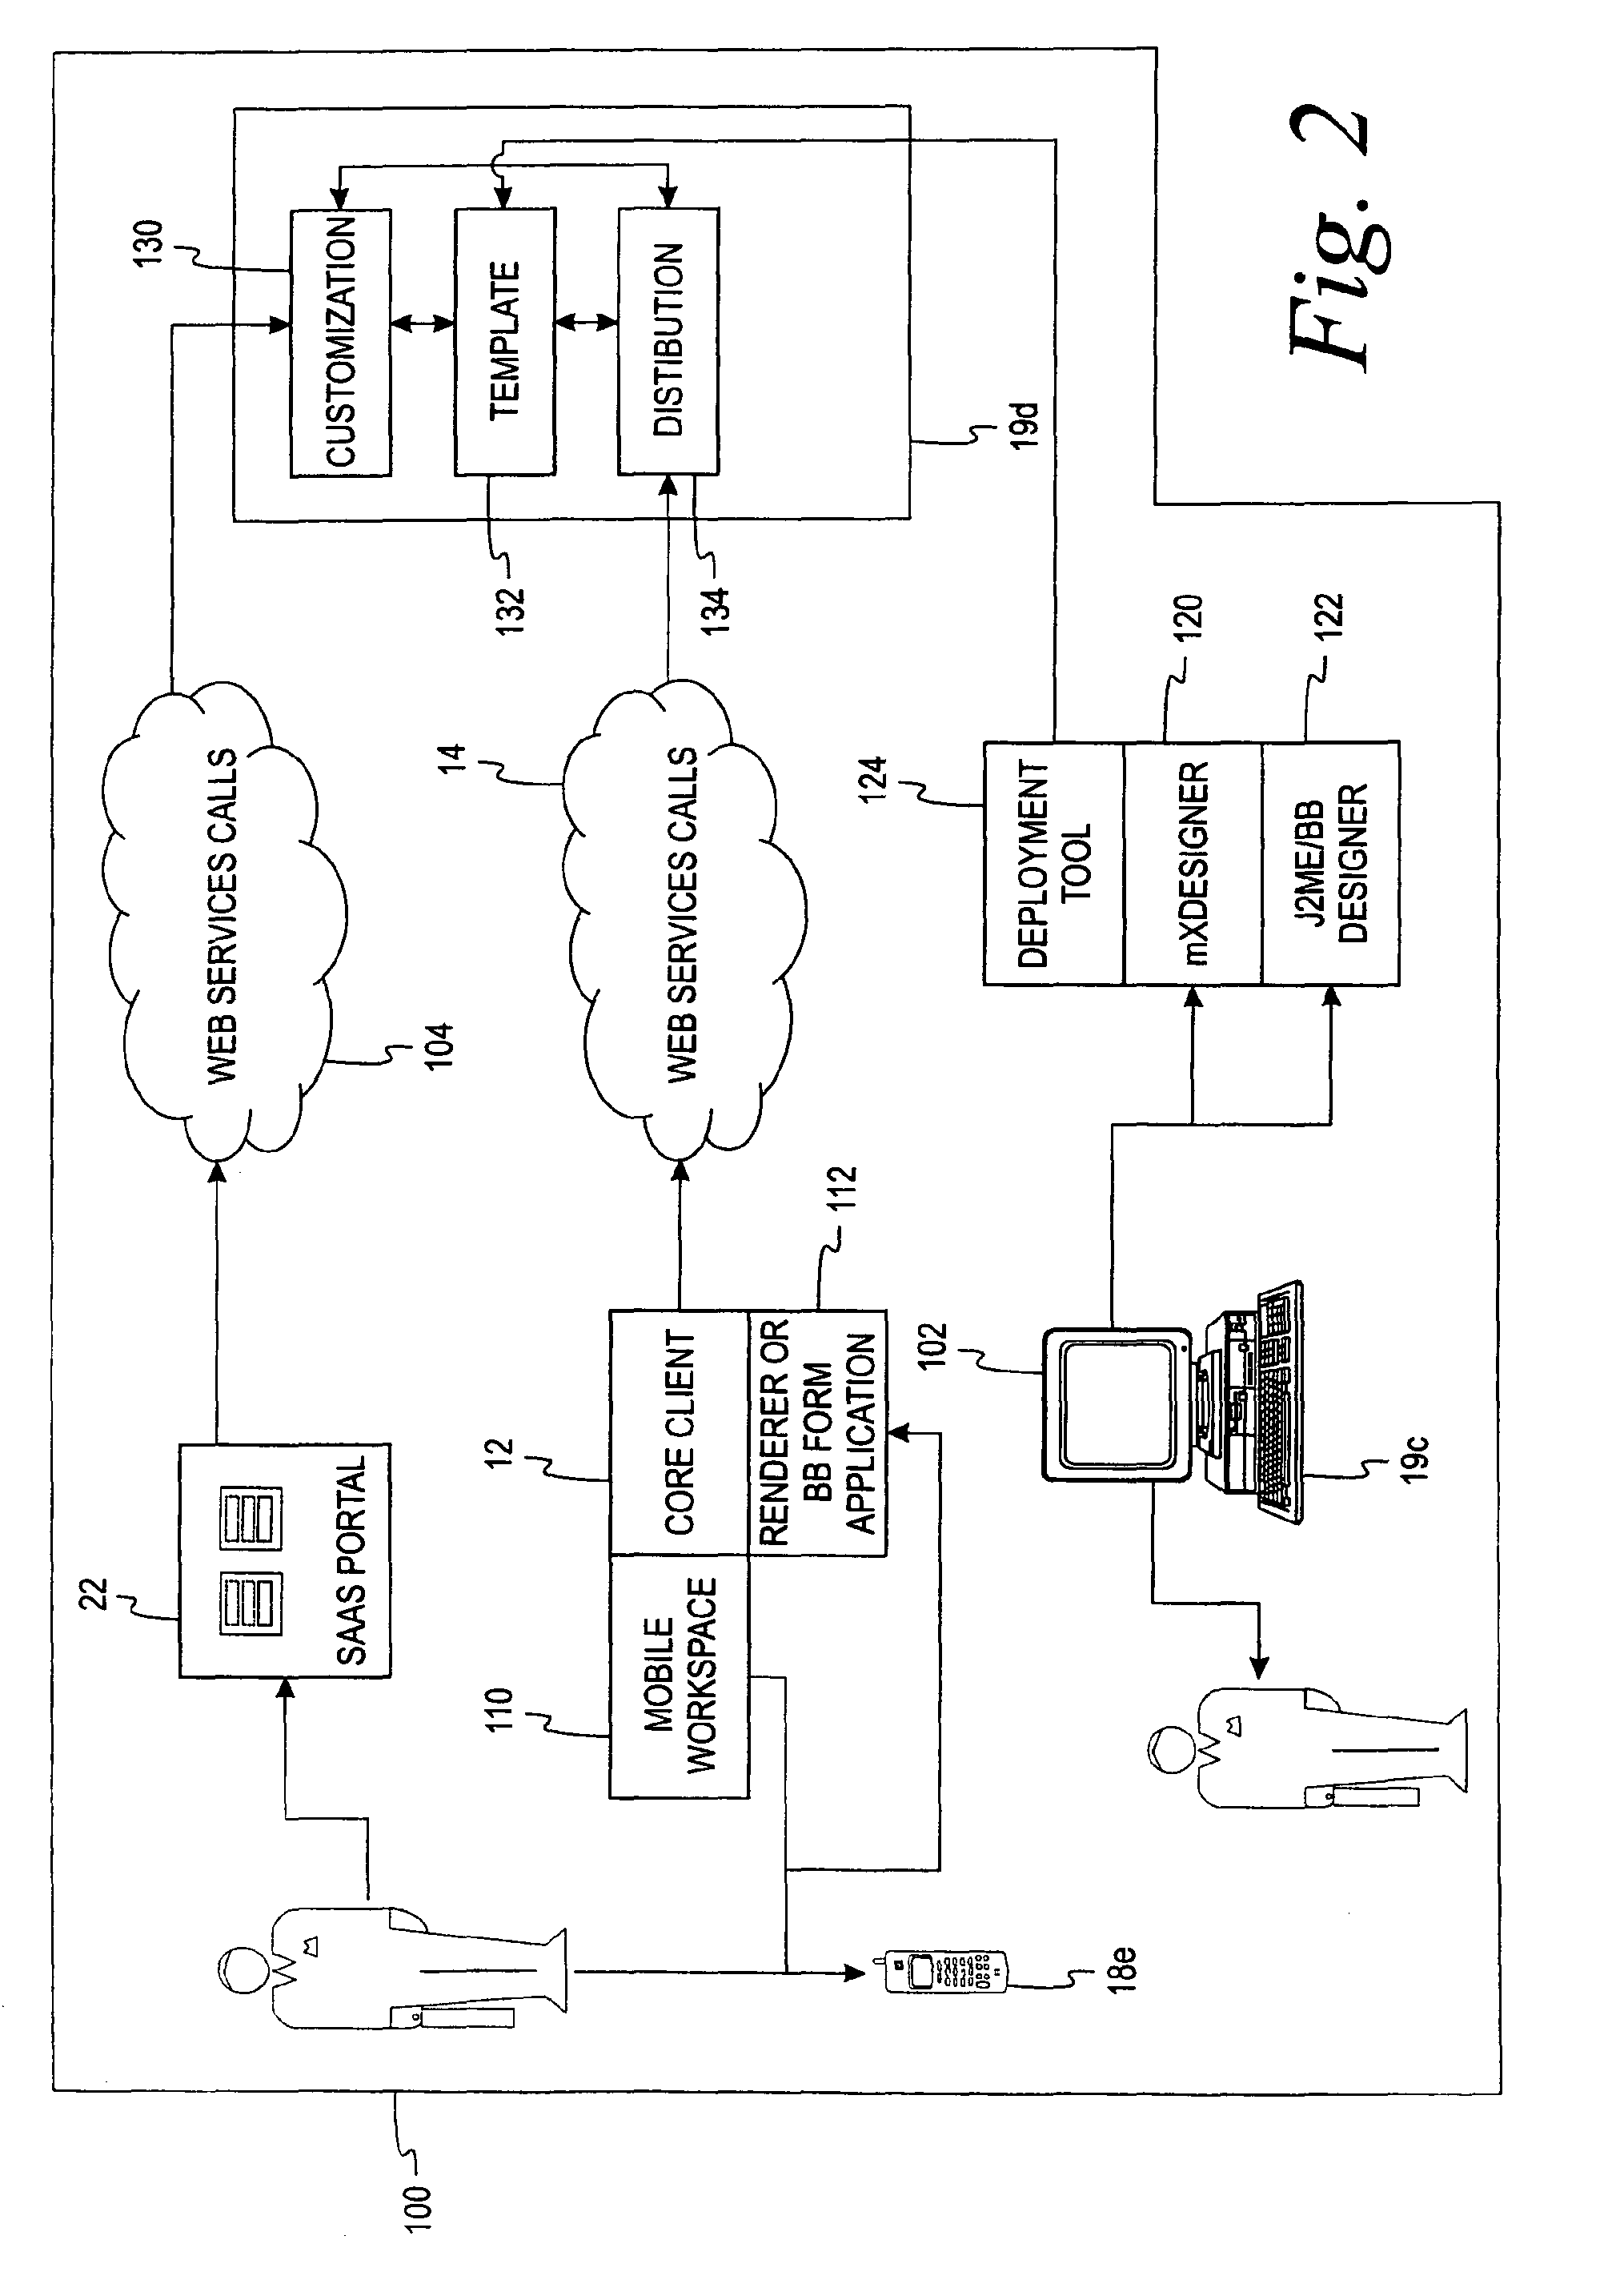 Method and system for customizing a mobile application using a web-based interface